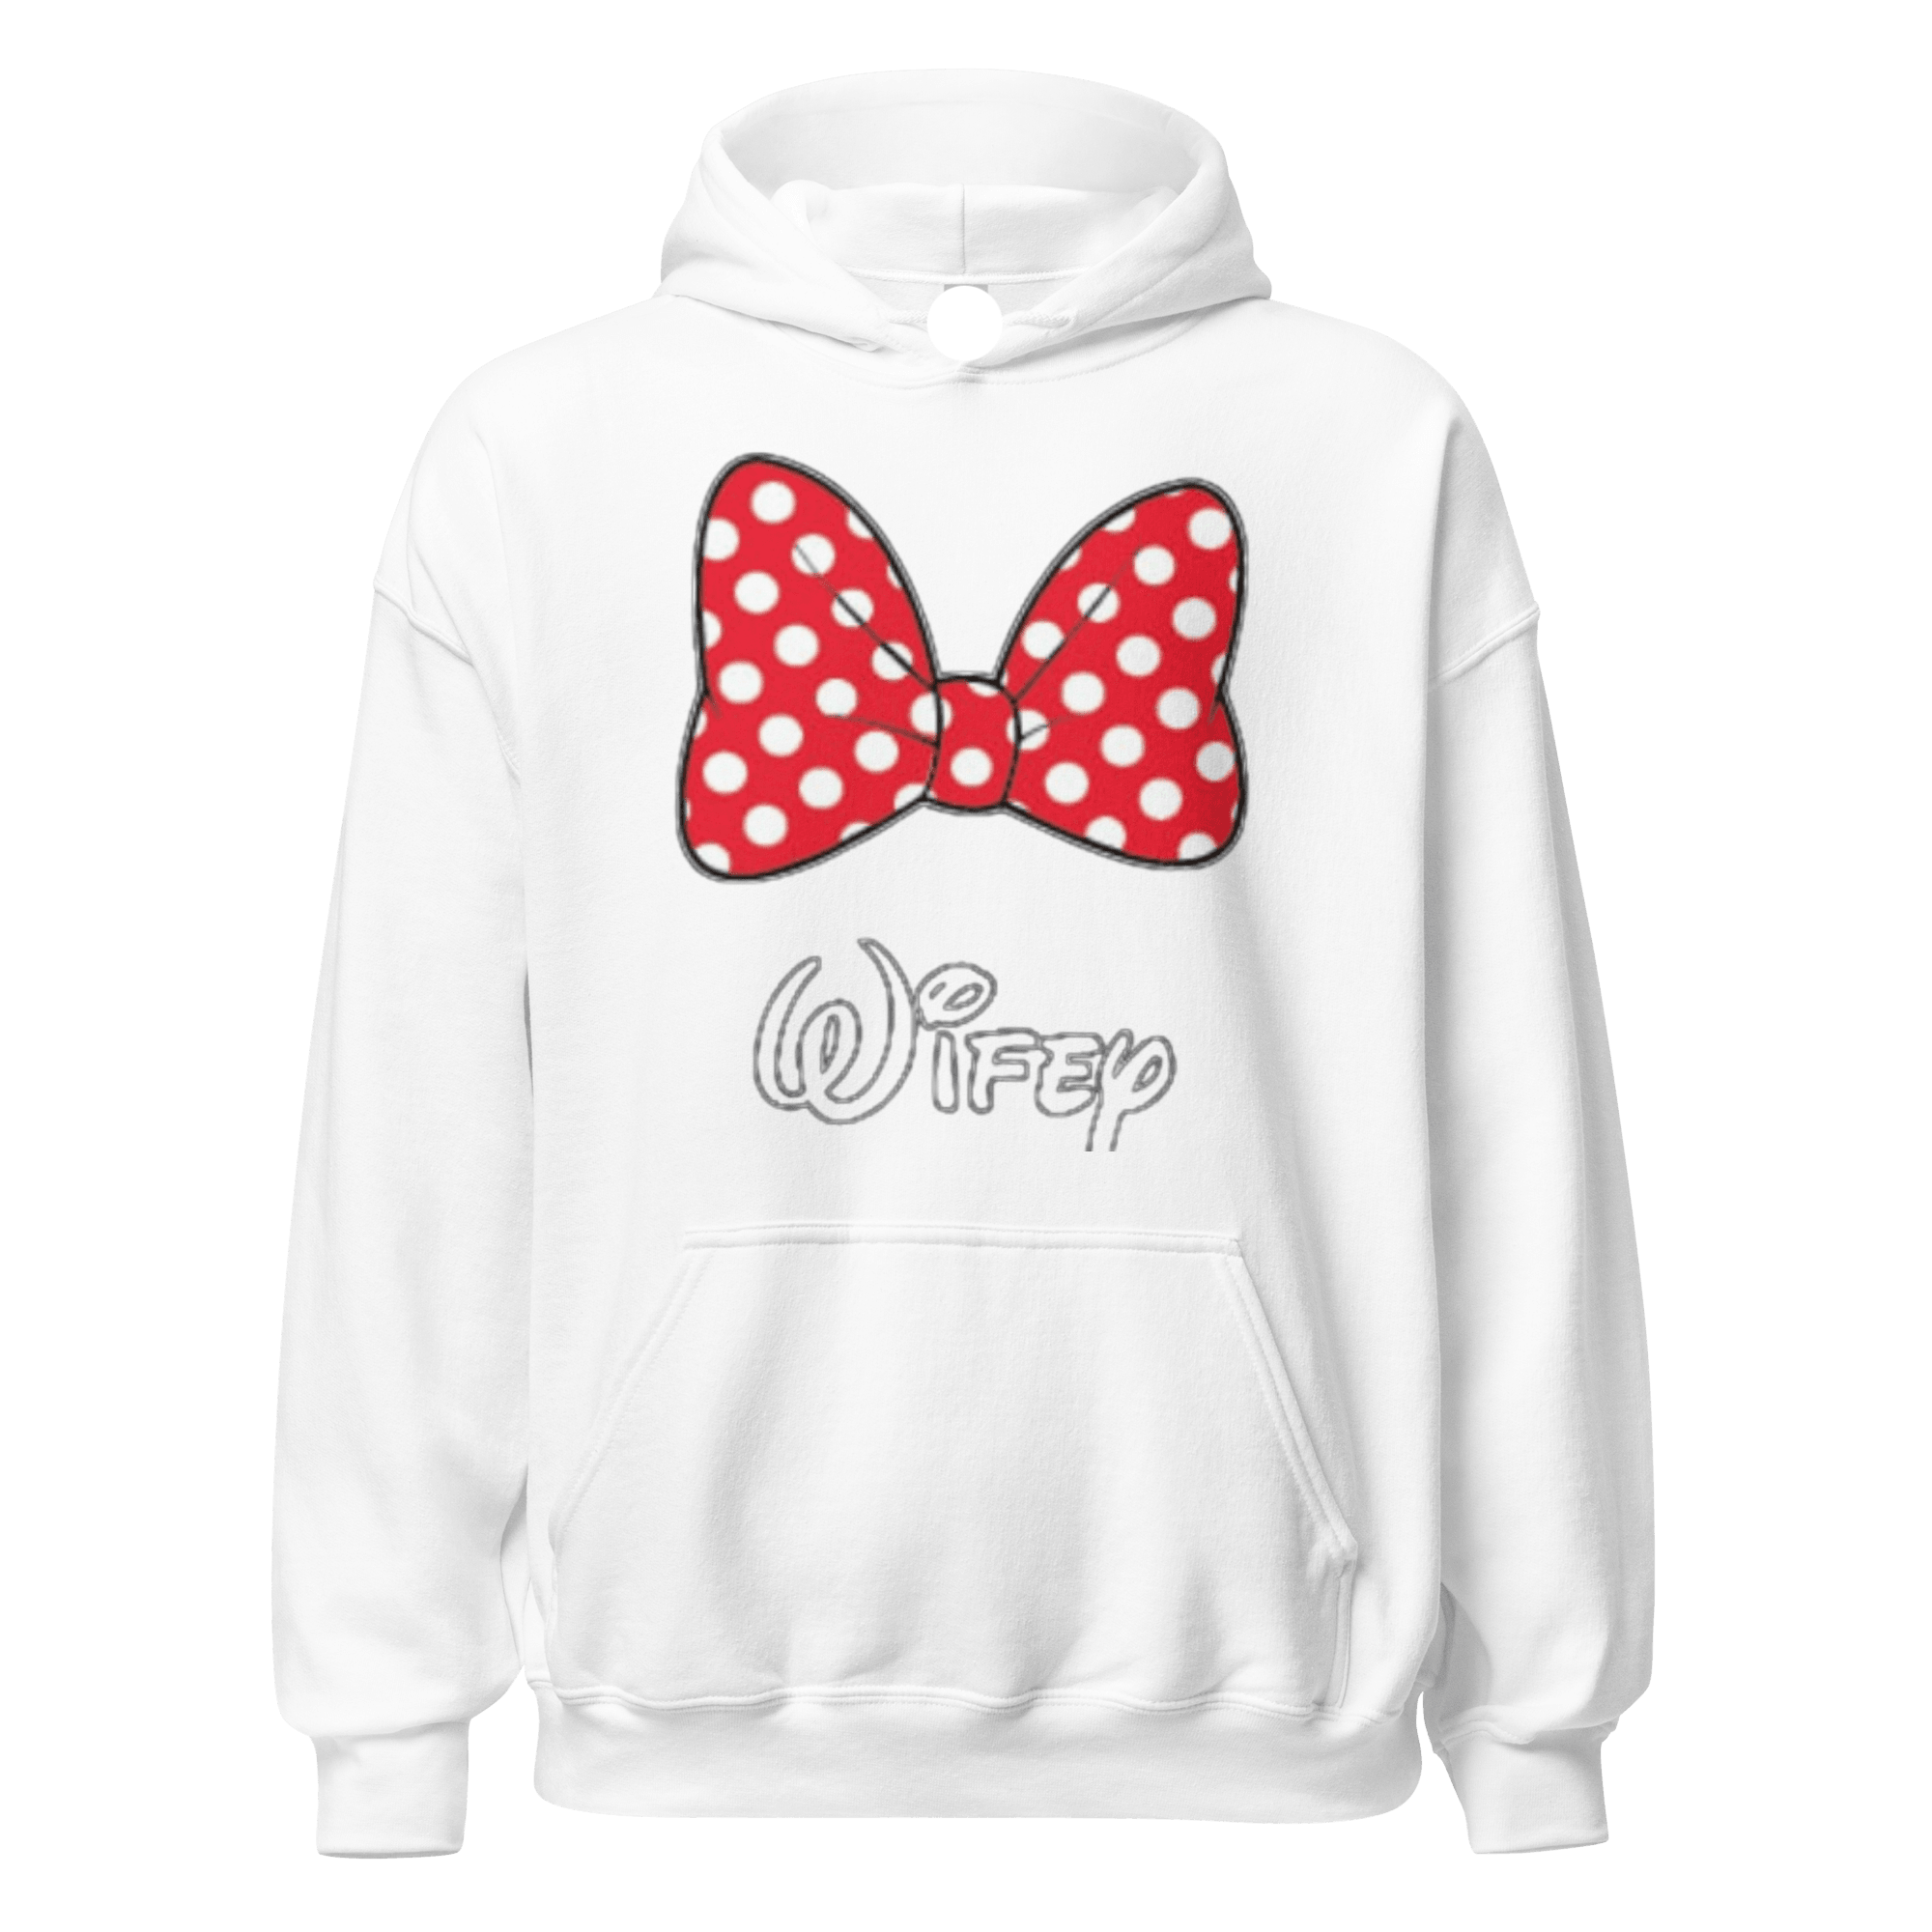 Animated Inspired Hubby/Wifey Realationship Hoodie Set Ultra Soft Blended Cotton Pullovers - TopKoalaTee